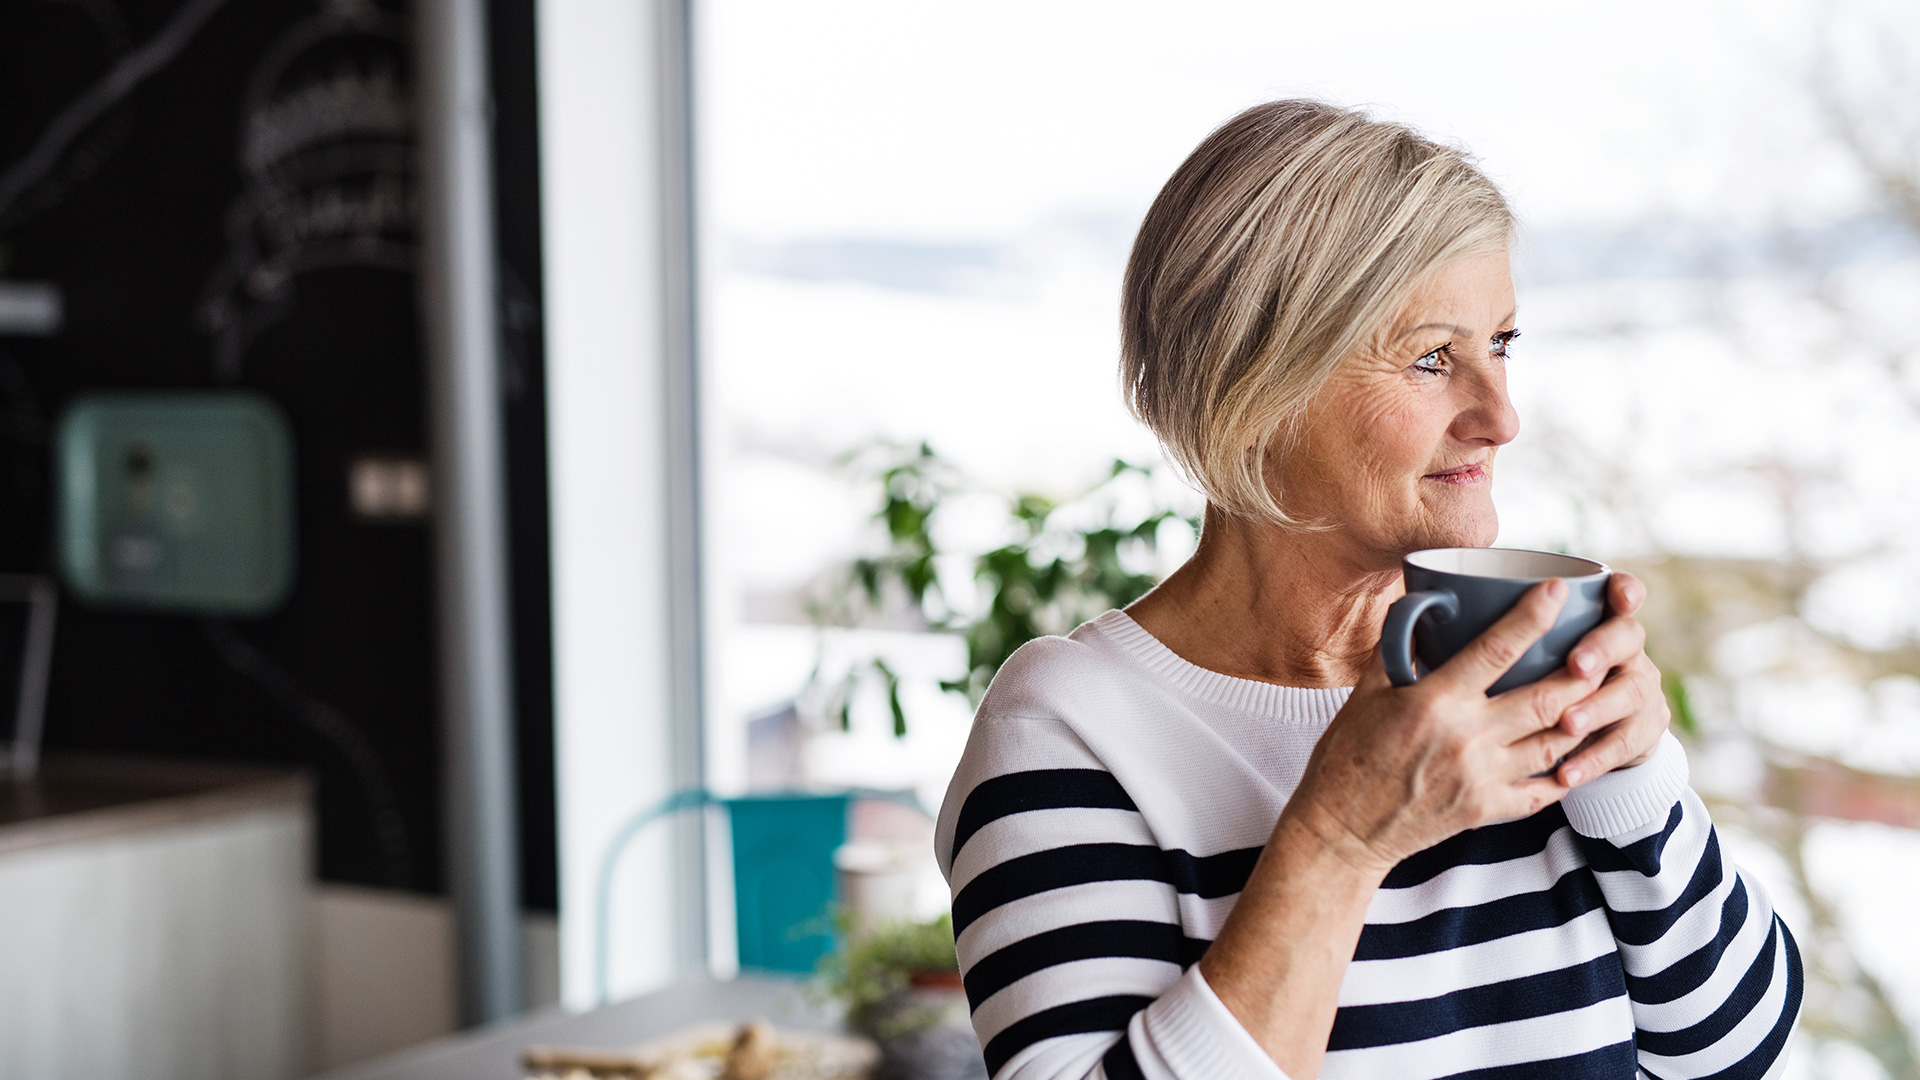 Recent trends show that Alzheimer’s disease is affecting women more than men. We asked Atrium Health experts about the role diet and lifestyle might play in this trend. 